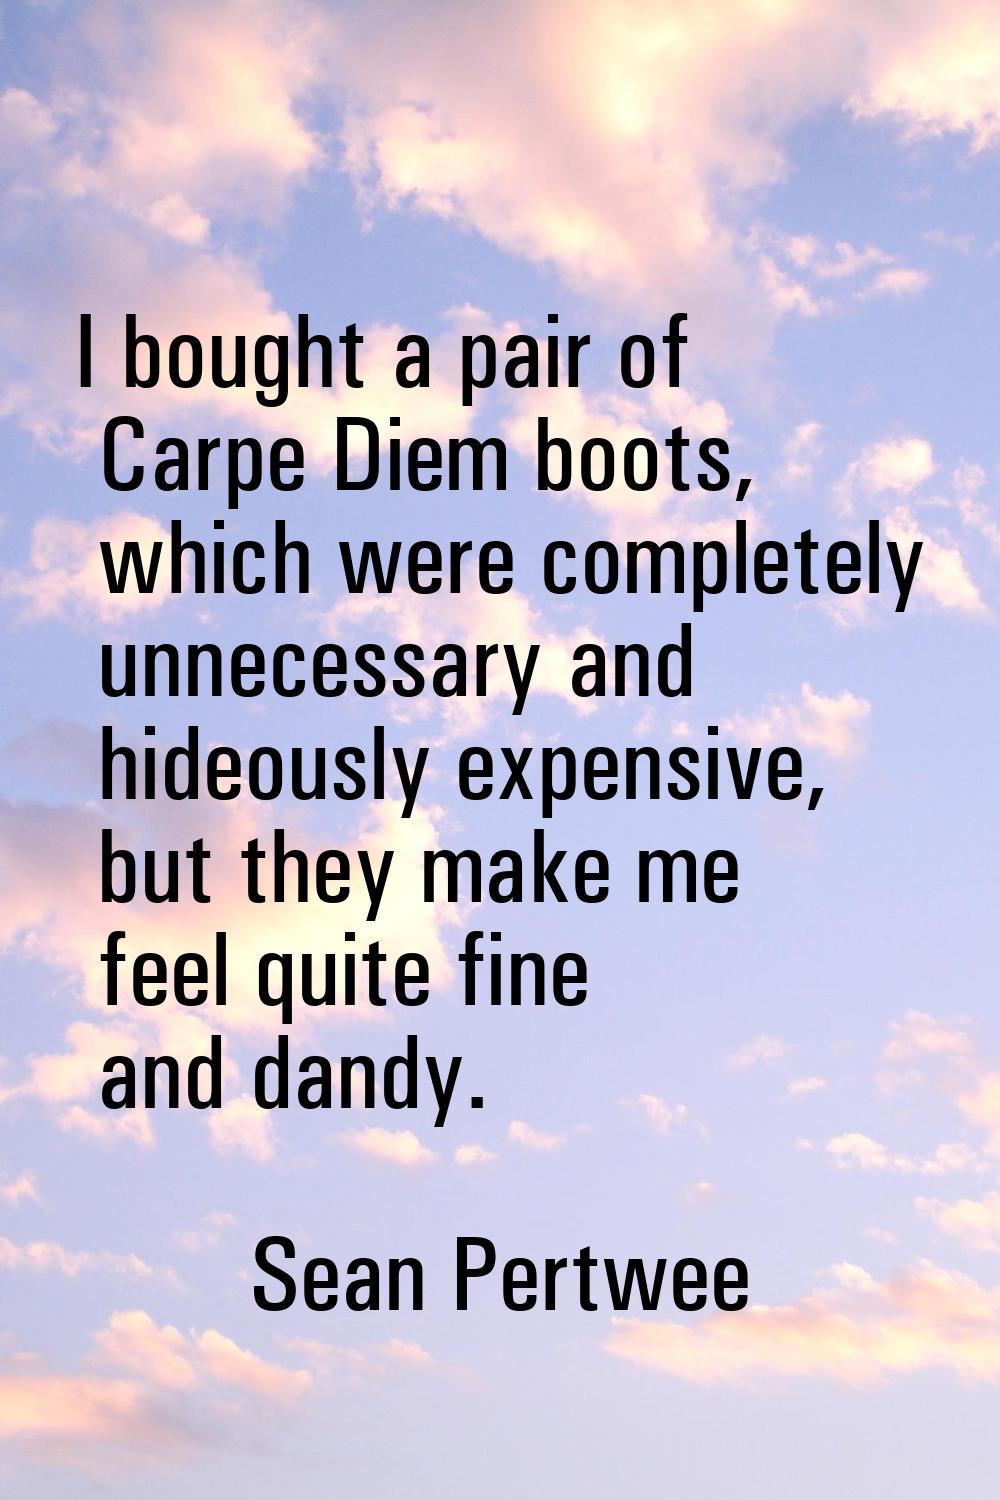 I bought a pair of Carpe Diem boots, which were completely unnecessary and hideously expensive, but